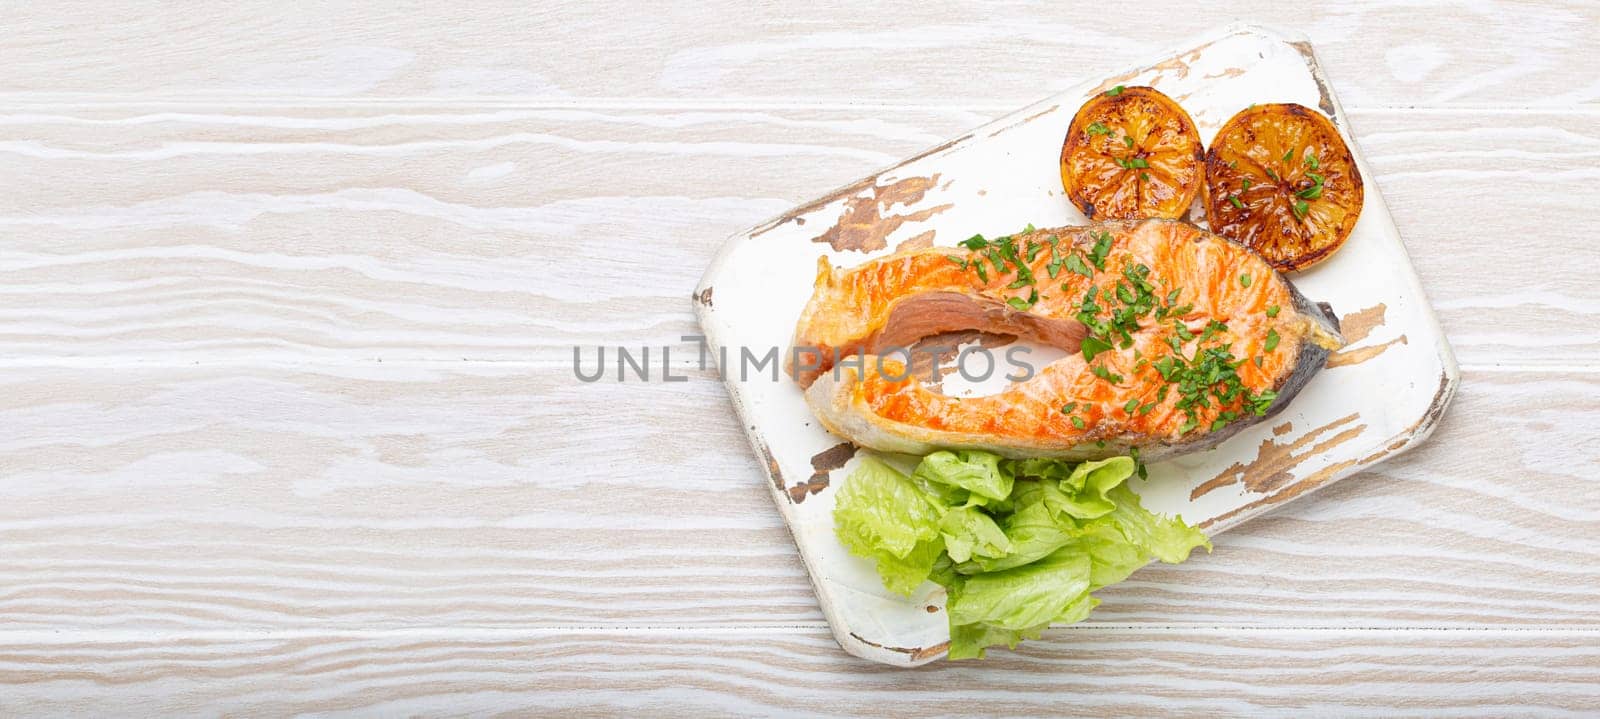 Grilled fish salmon steak and green salad with lemon served on white cutting board rustic wooden background top view, balanced diet or healthy nutrition meal with salmon and veggies, copy space by its_al_dente